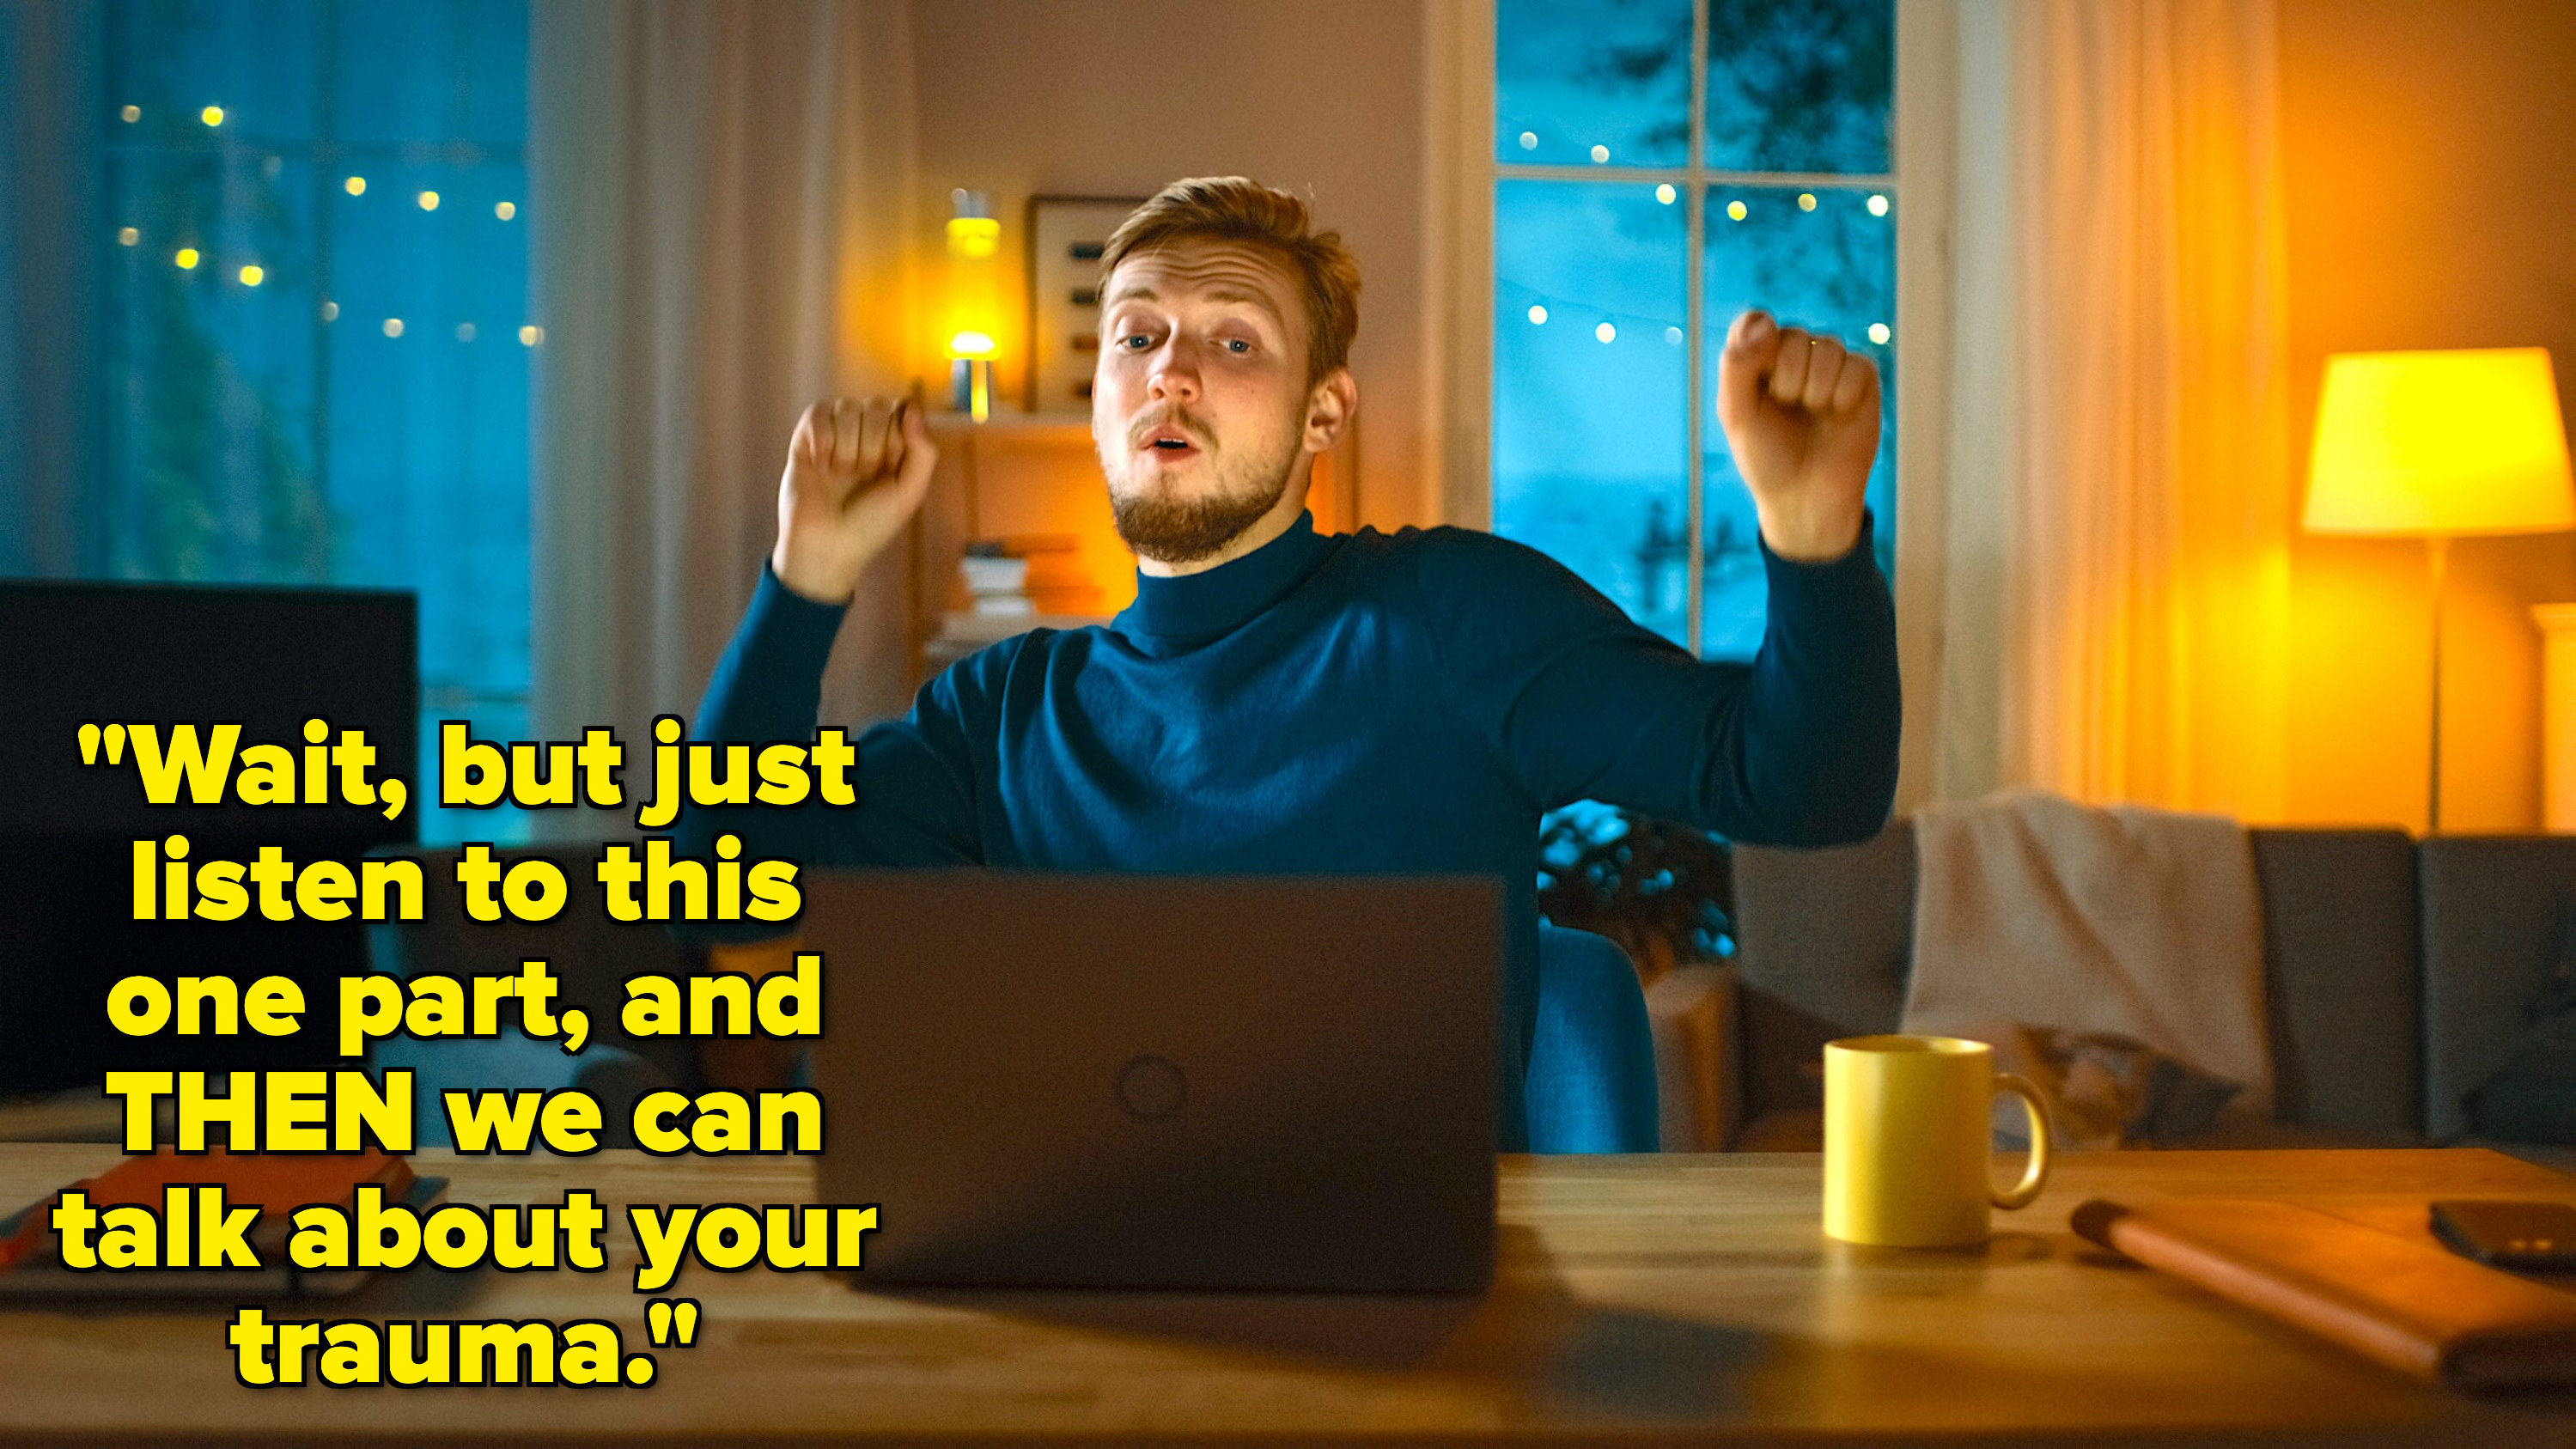 A man looking outraged at his computer with his hands up